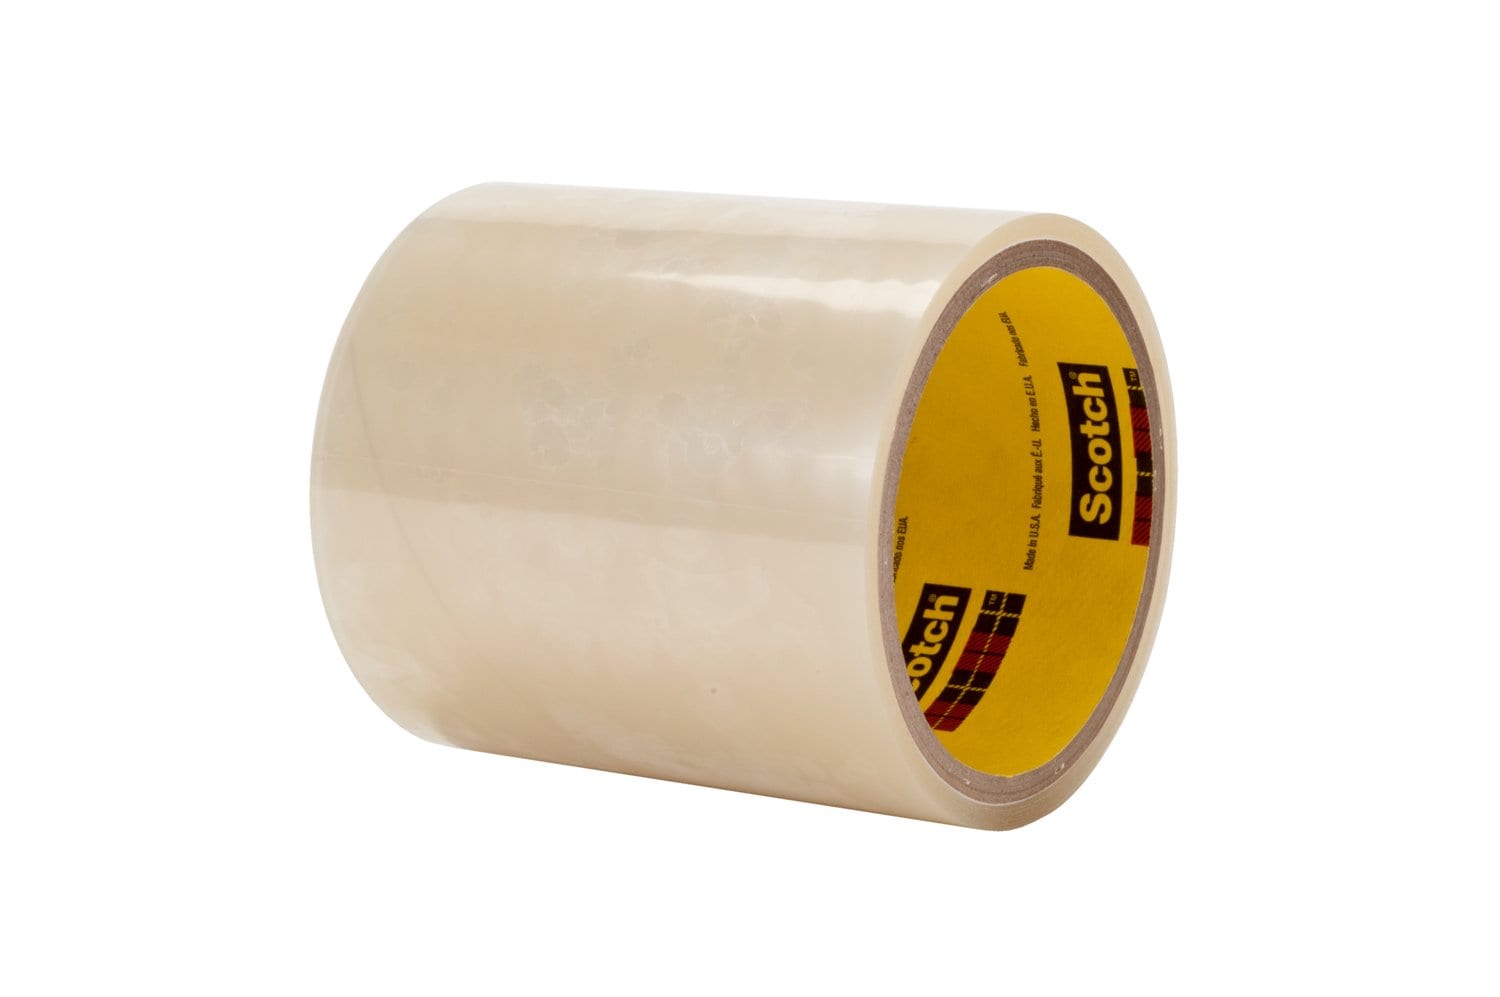 7010333775 - 3M Adhesive Transfer Tape 467MP, Clear, 20 in x 60 yd, 2 mil, 1 roll
per case